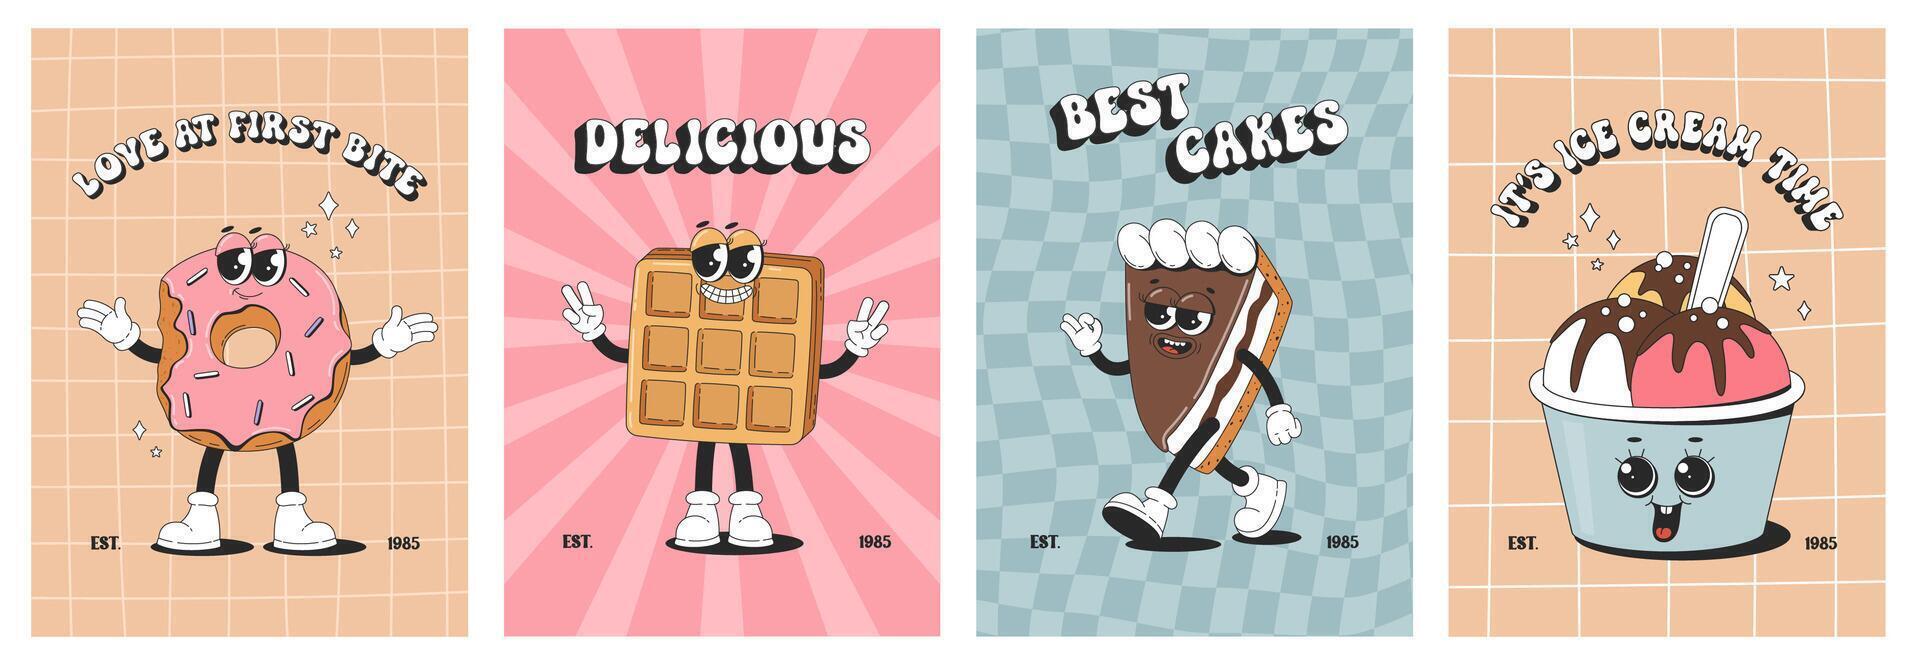 Set of vintage cartoon posters with desserts. Cute groovy sweet cake, waffles, oatmeal cookies, ice cream, donut.. vector